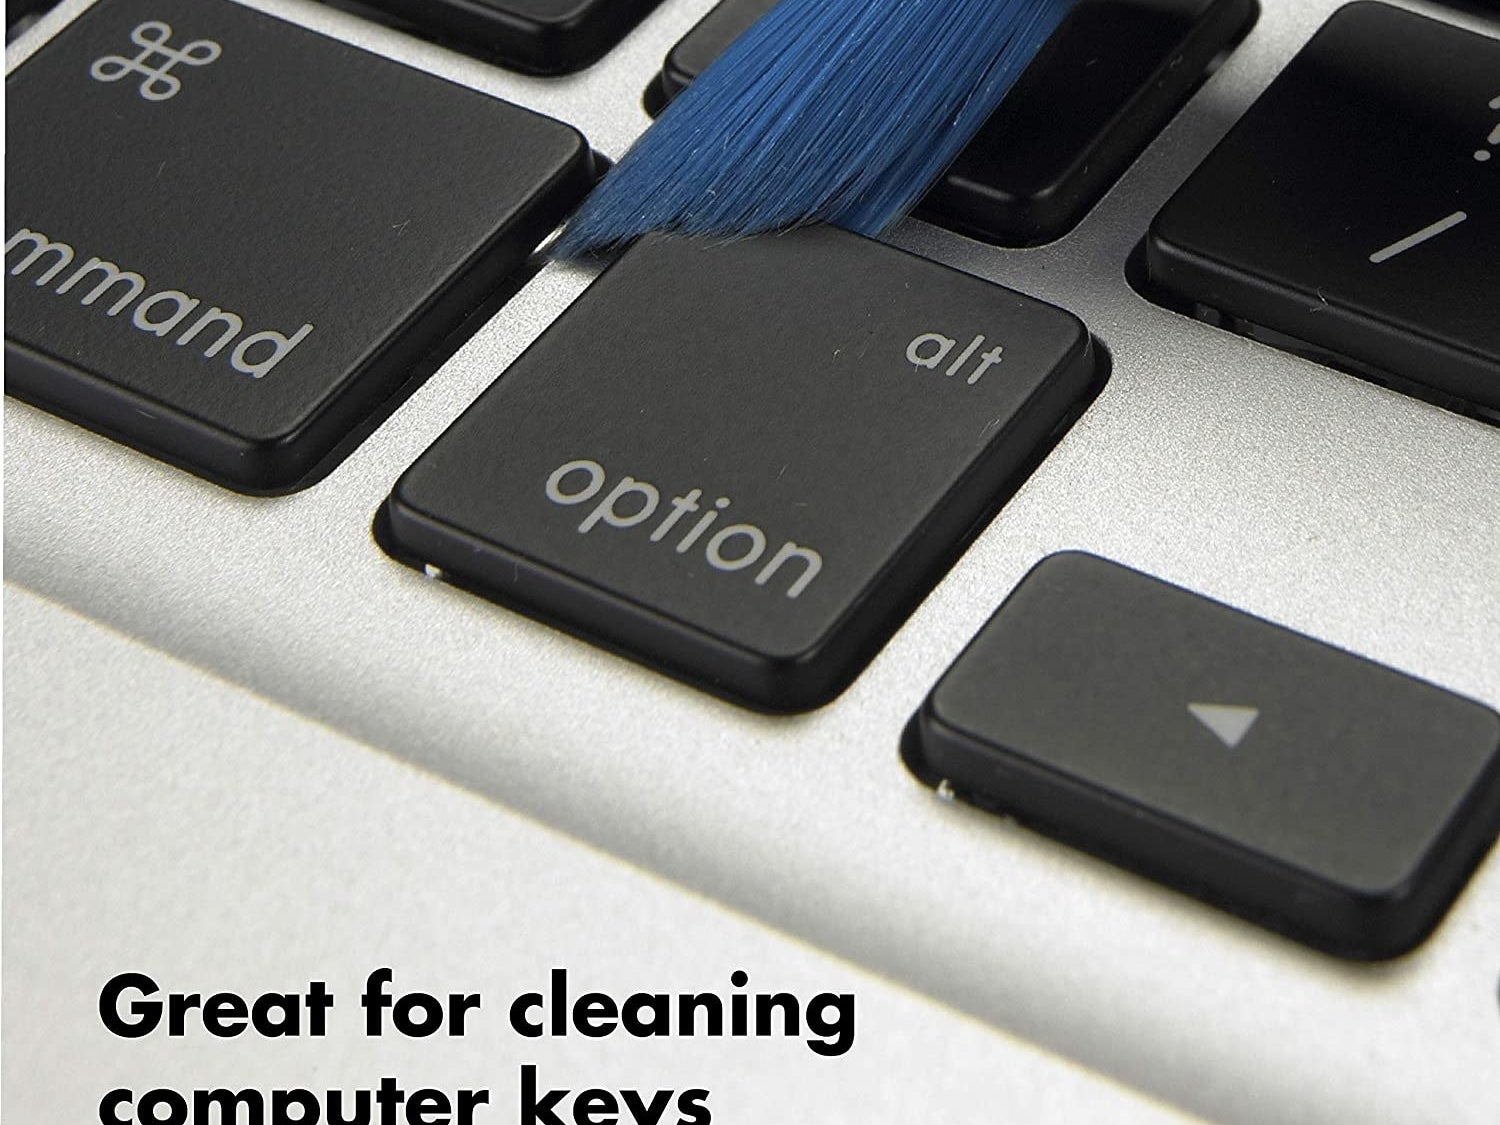 Cleaning pen brush cleaning between keyboard